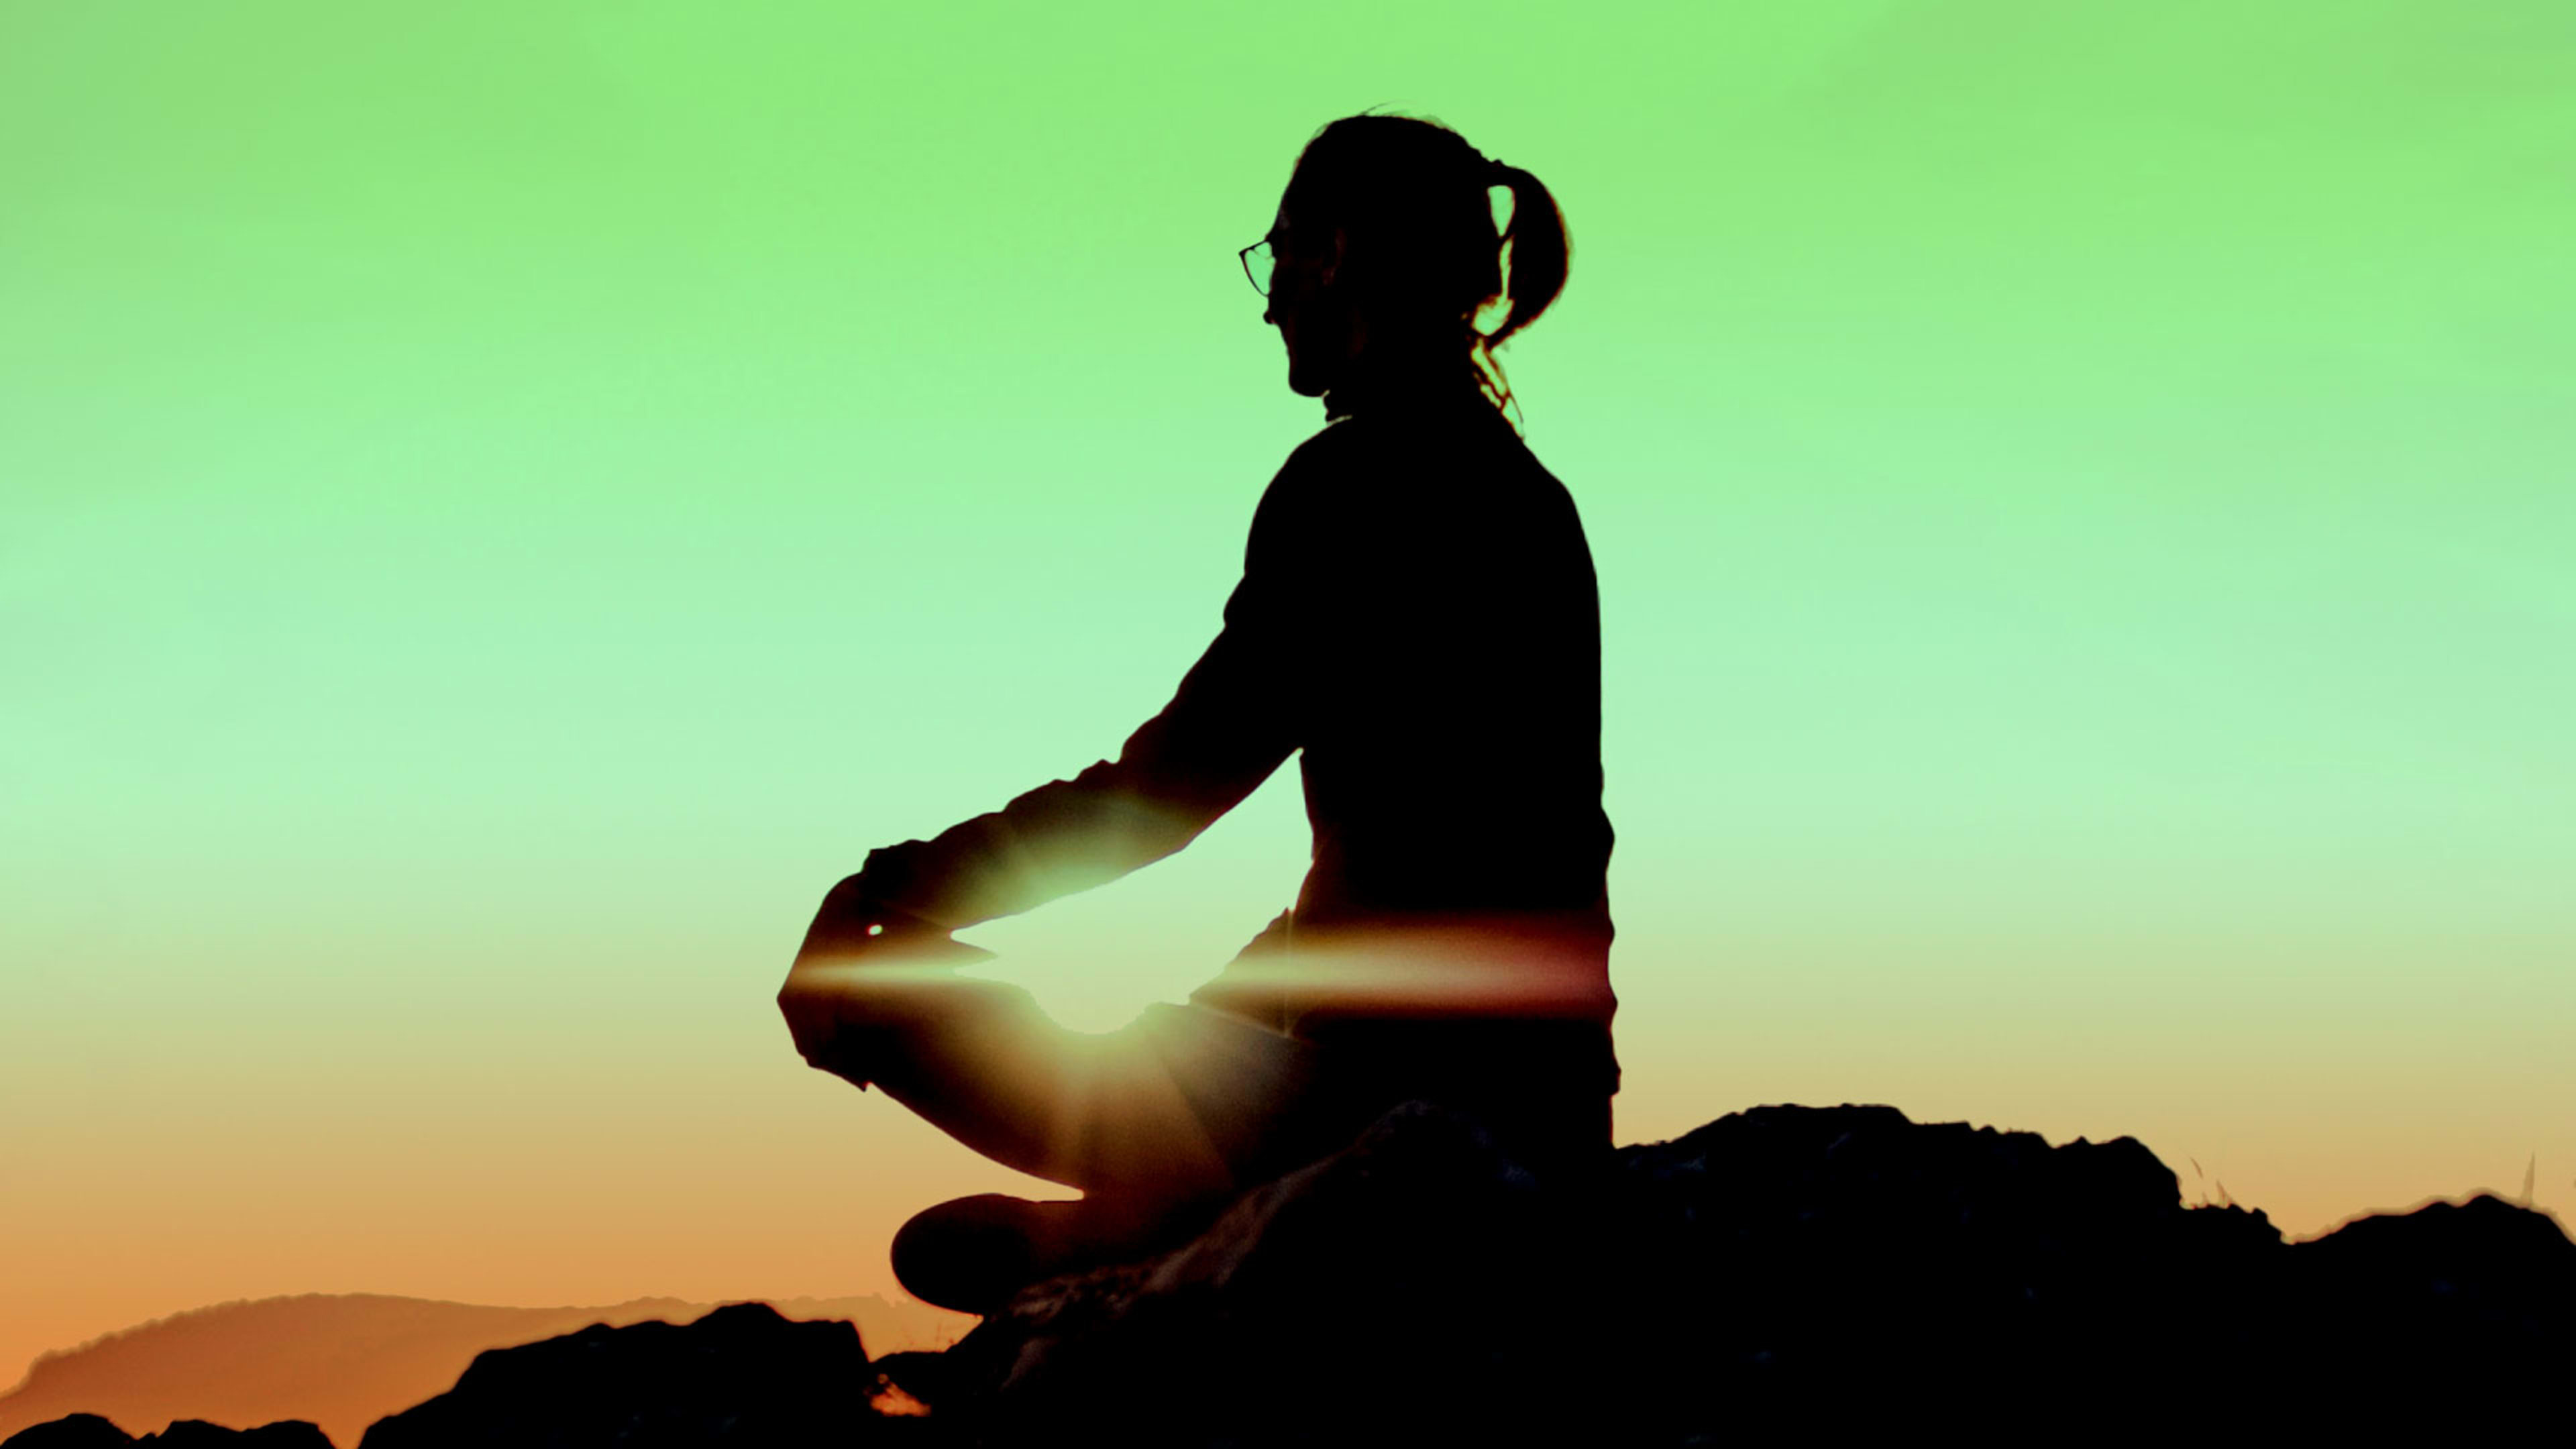 I took a 30-day meditation challenge. Here’s what it taught me about managing anxiety